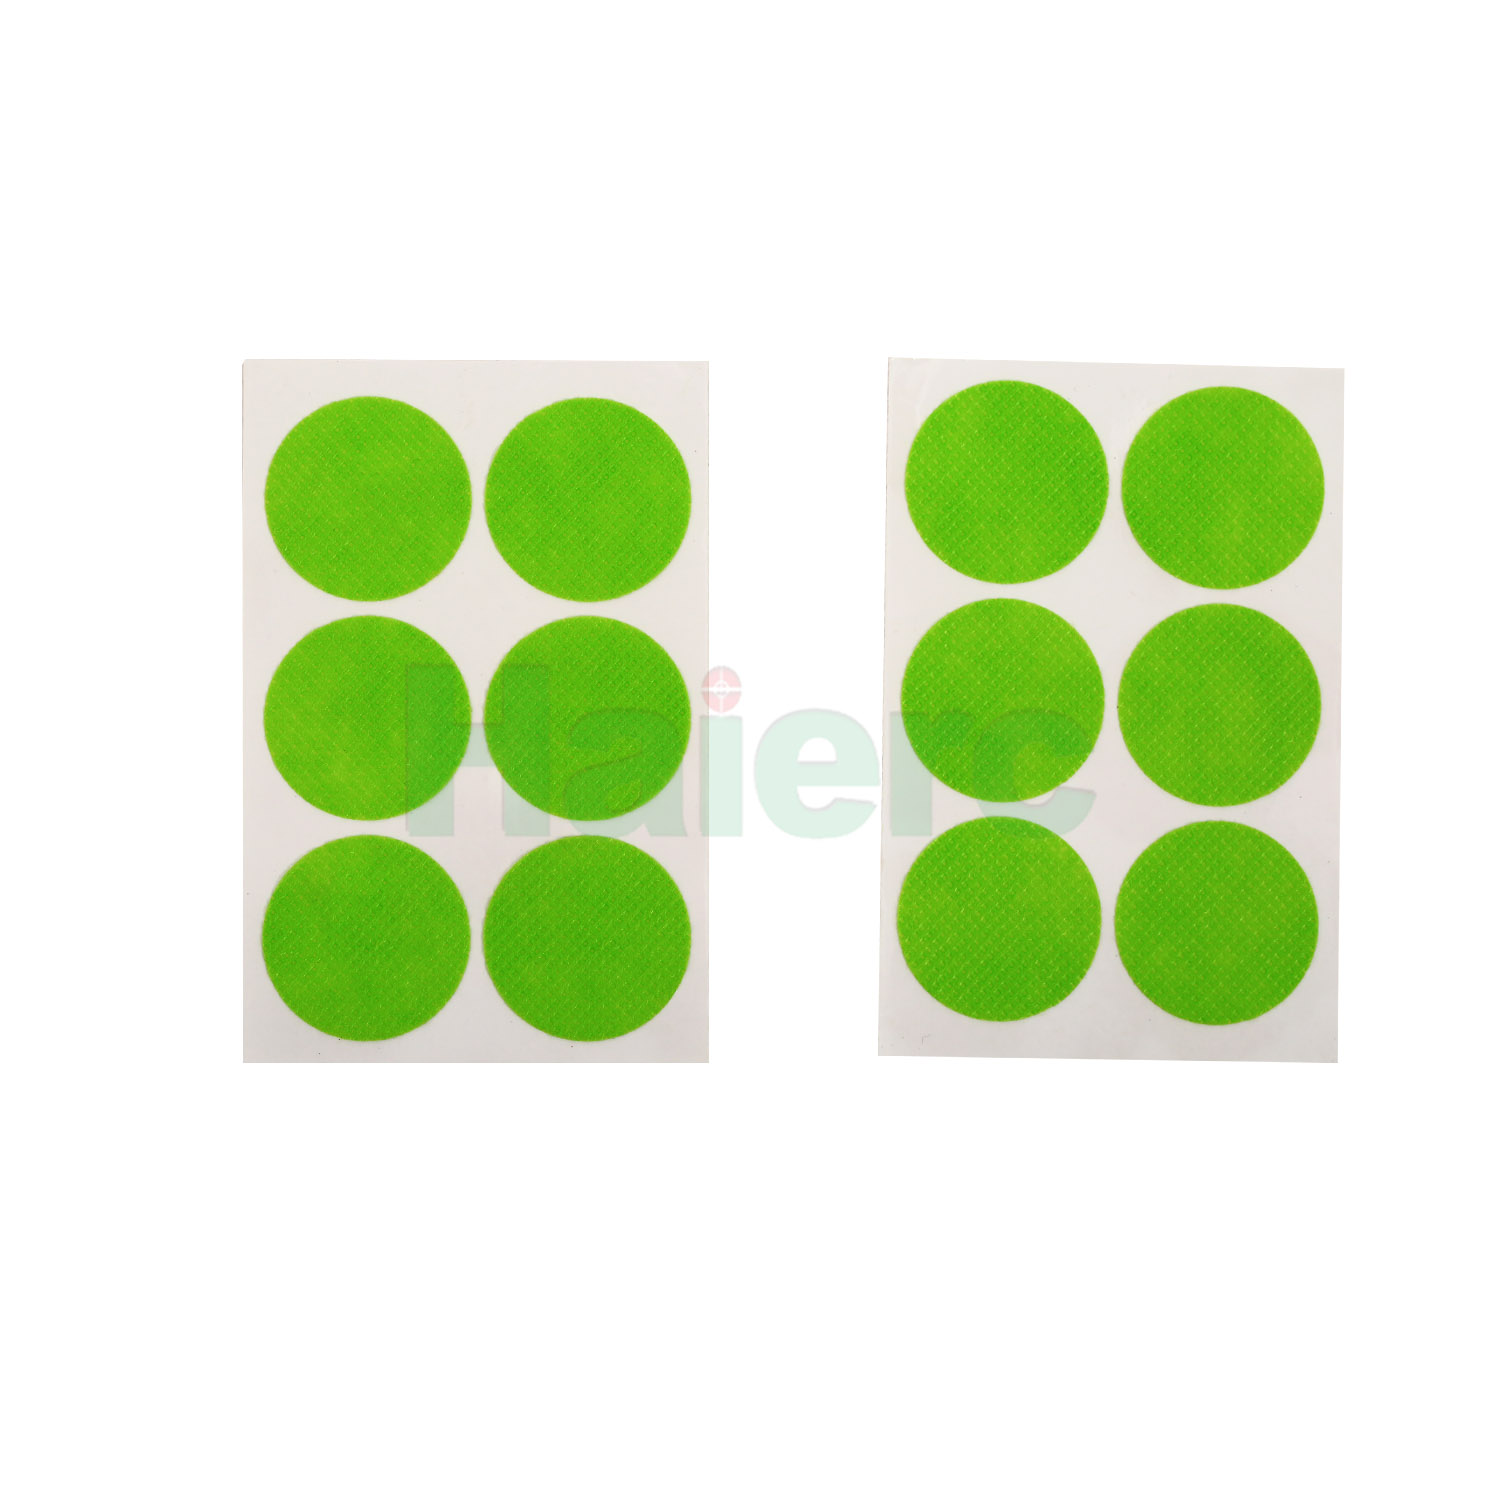 Haierc Natural Non-toxic Anti Mosquito Repellent Patches Stickers for Kids Adults Protection Sticker HC6201